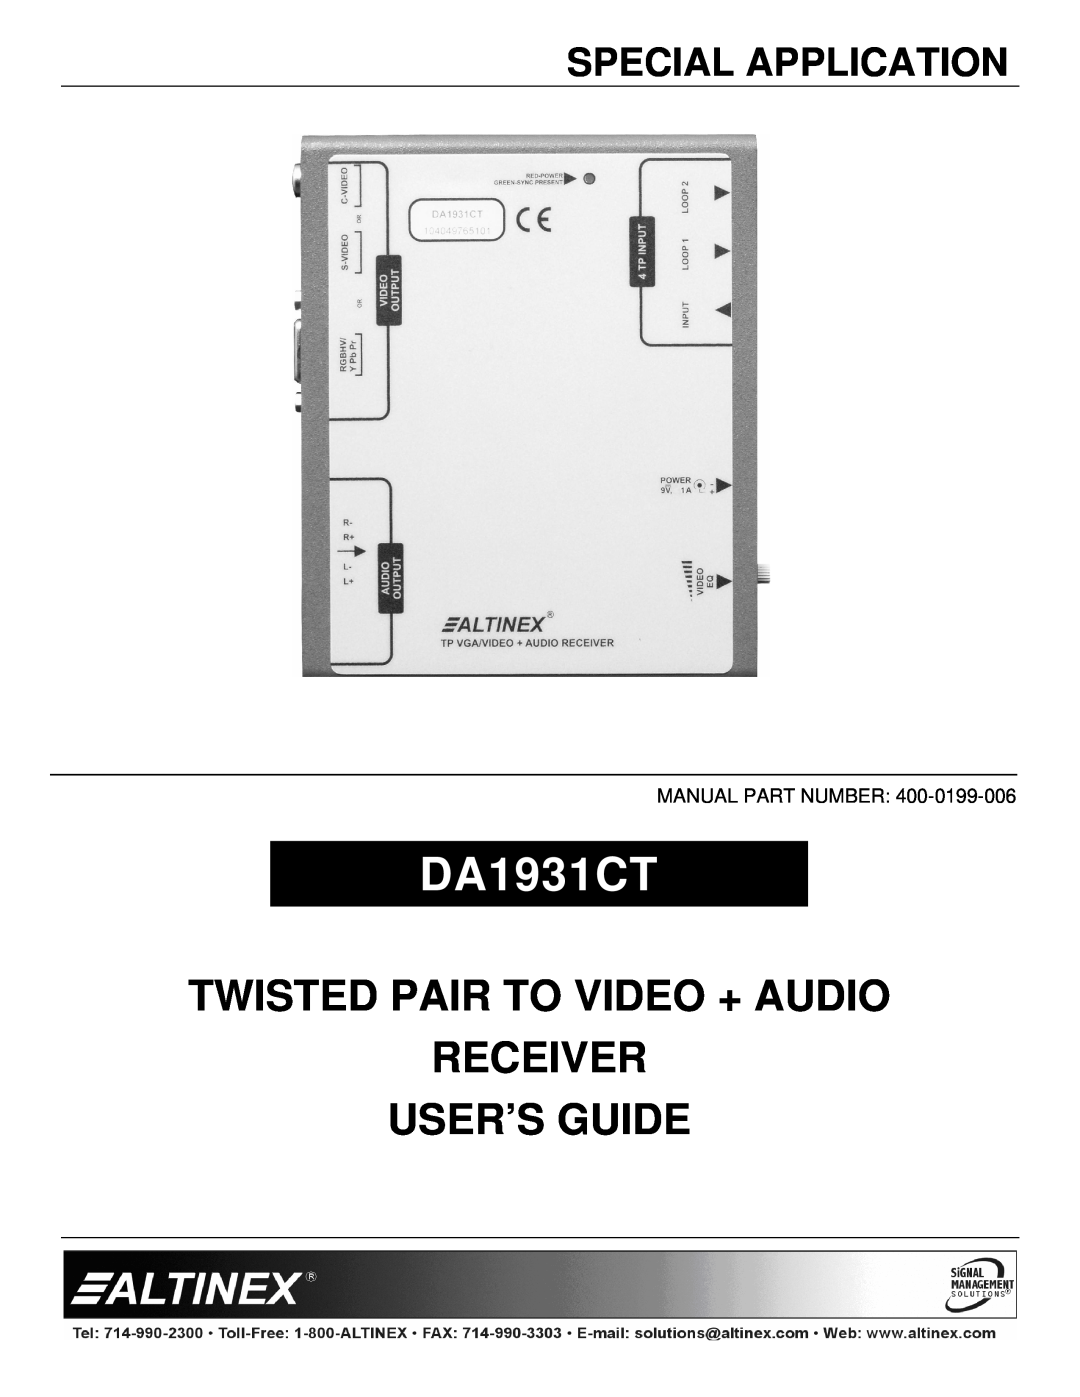 Altinex DA1931CT manual Special Application, Twisted Pair To Video + Audio Receiver, User’S Guide 